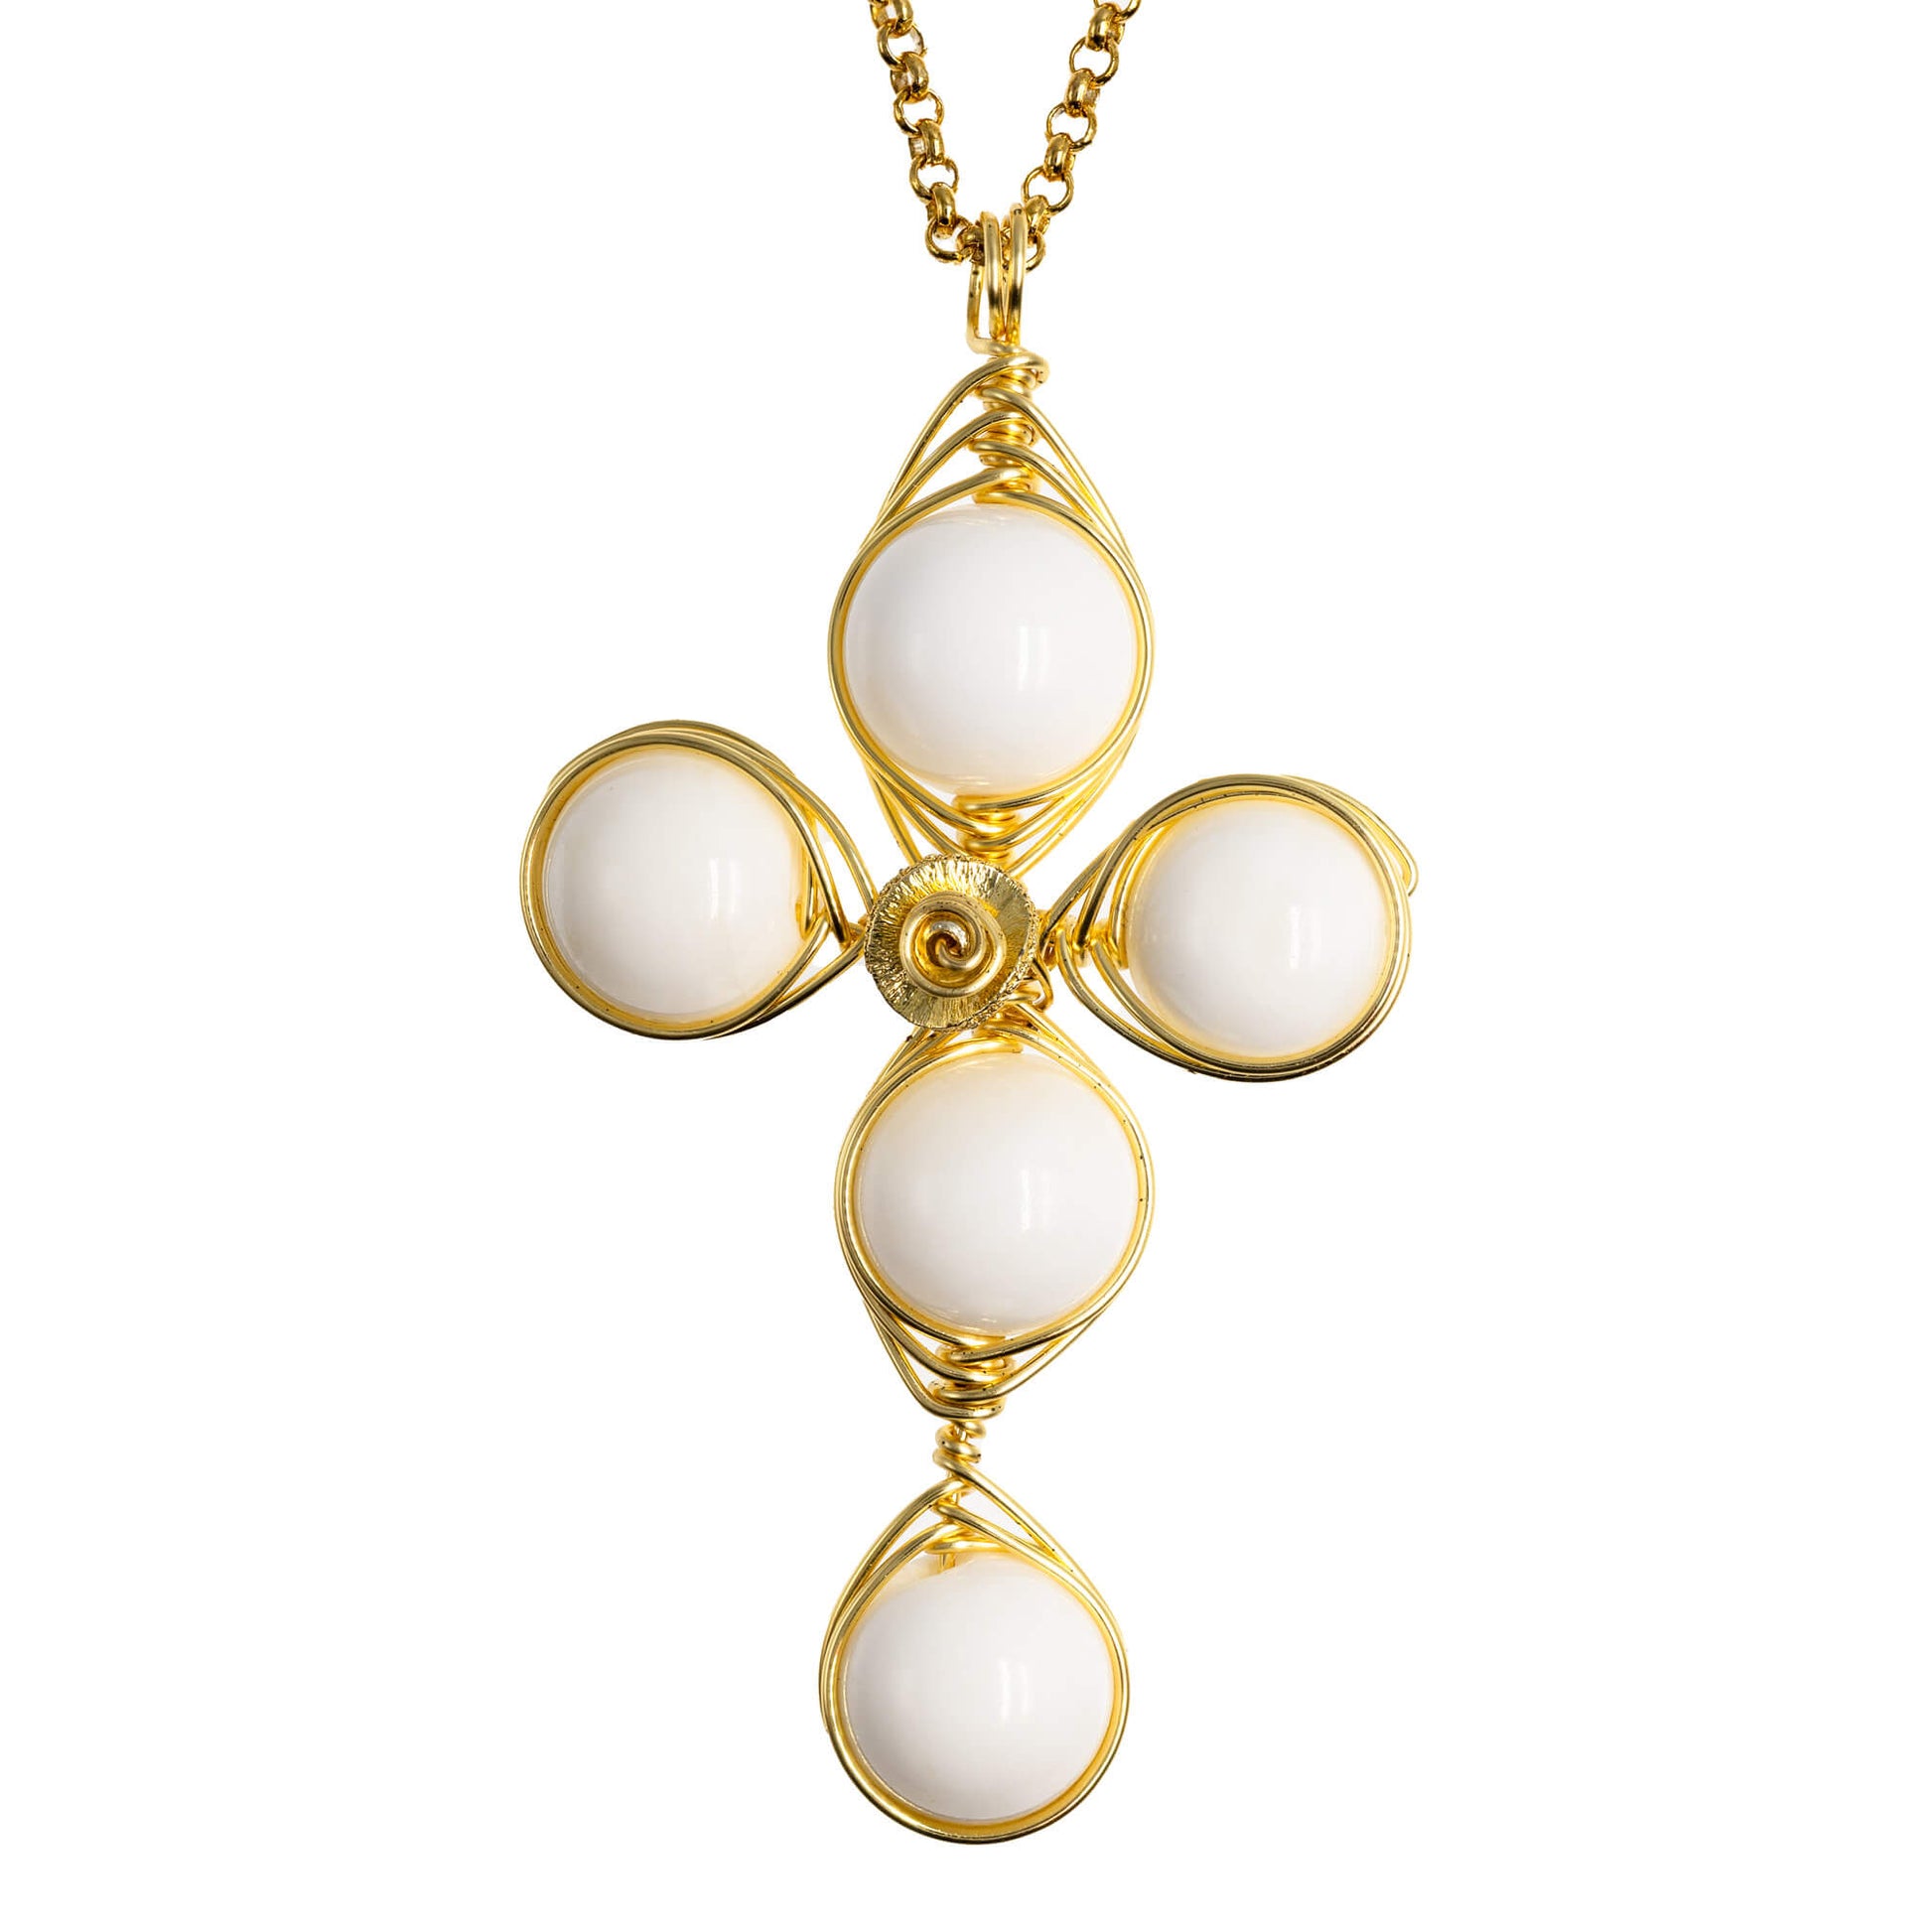 Magic Cross Pendant Necklace is 2.5 inches long on a 16 inches 22K gold plated chain. Handmade with Non-tarnish gold plated wire and Polished White Shells Beads. Gold and white minimalist Wired Wrapped Cross.